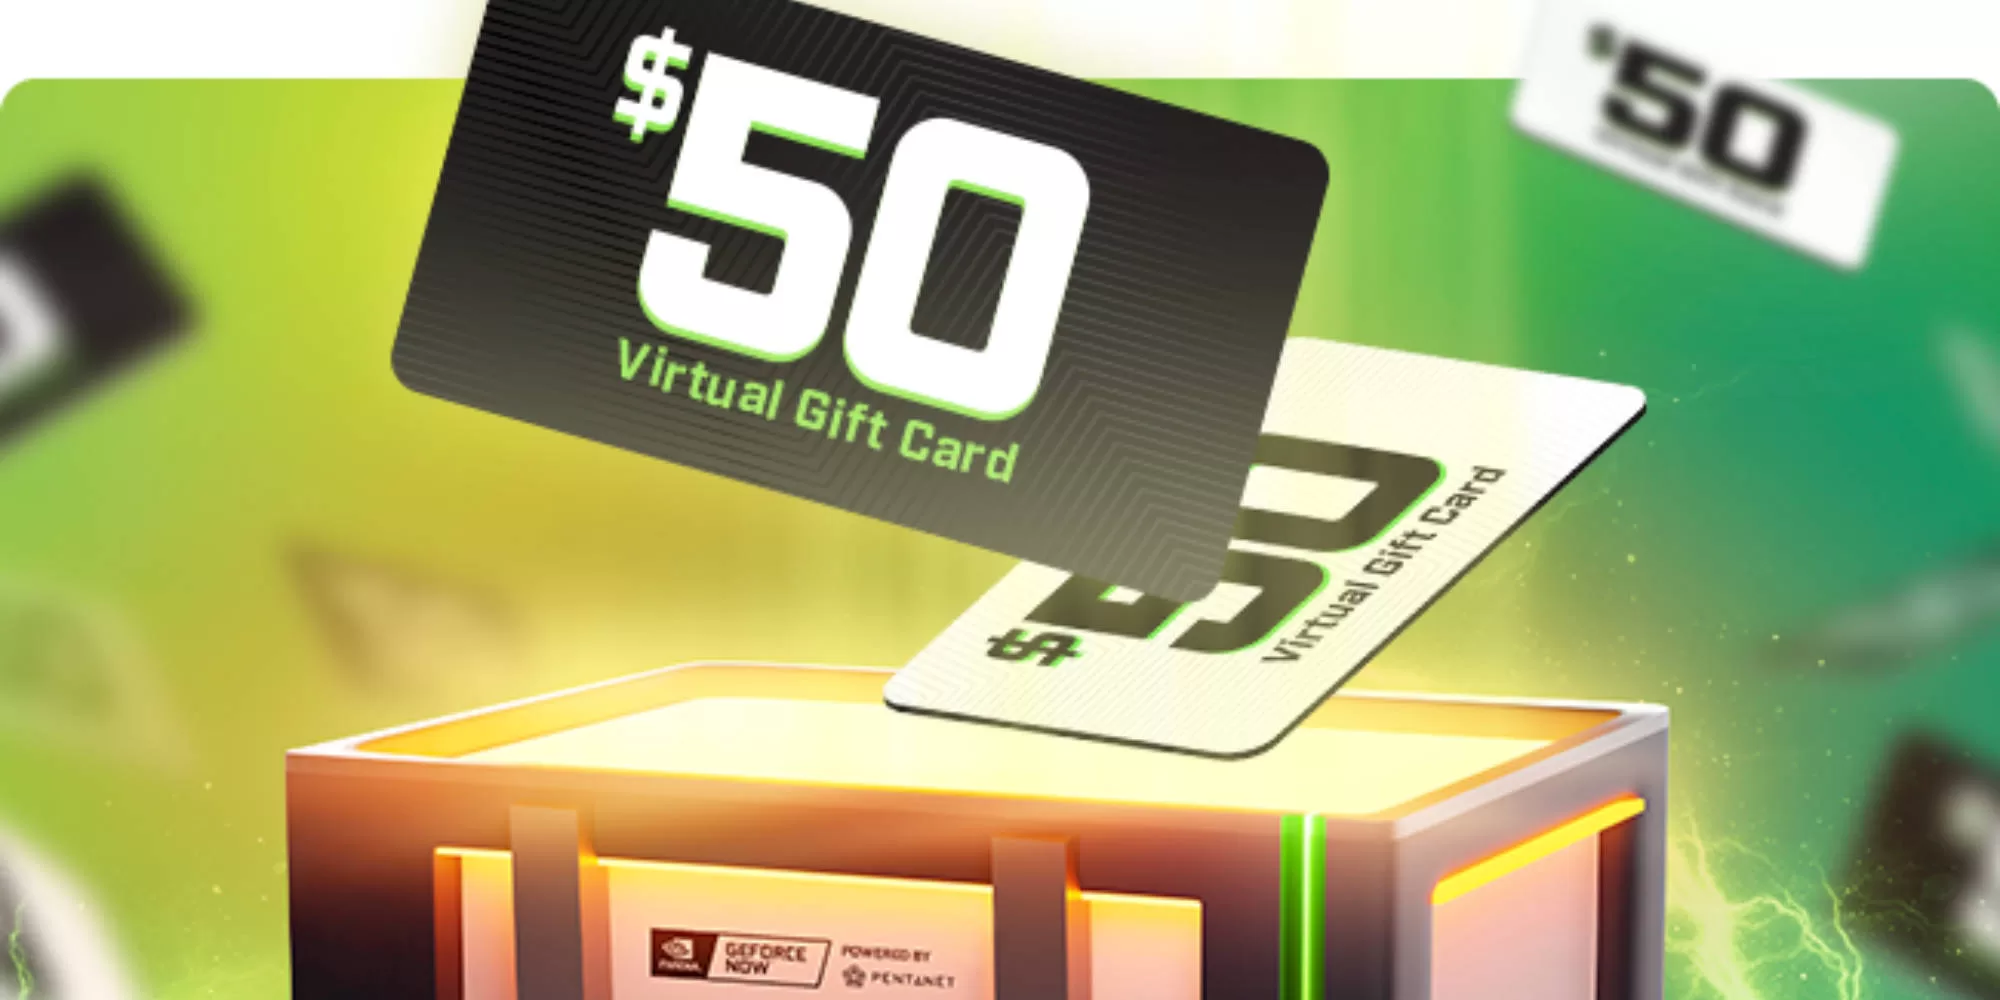 GeForce NOW Black Friday deal: $24 off annual plan, $50 VISA gift card